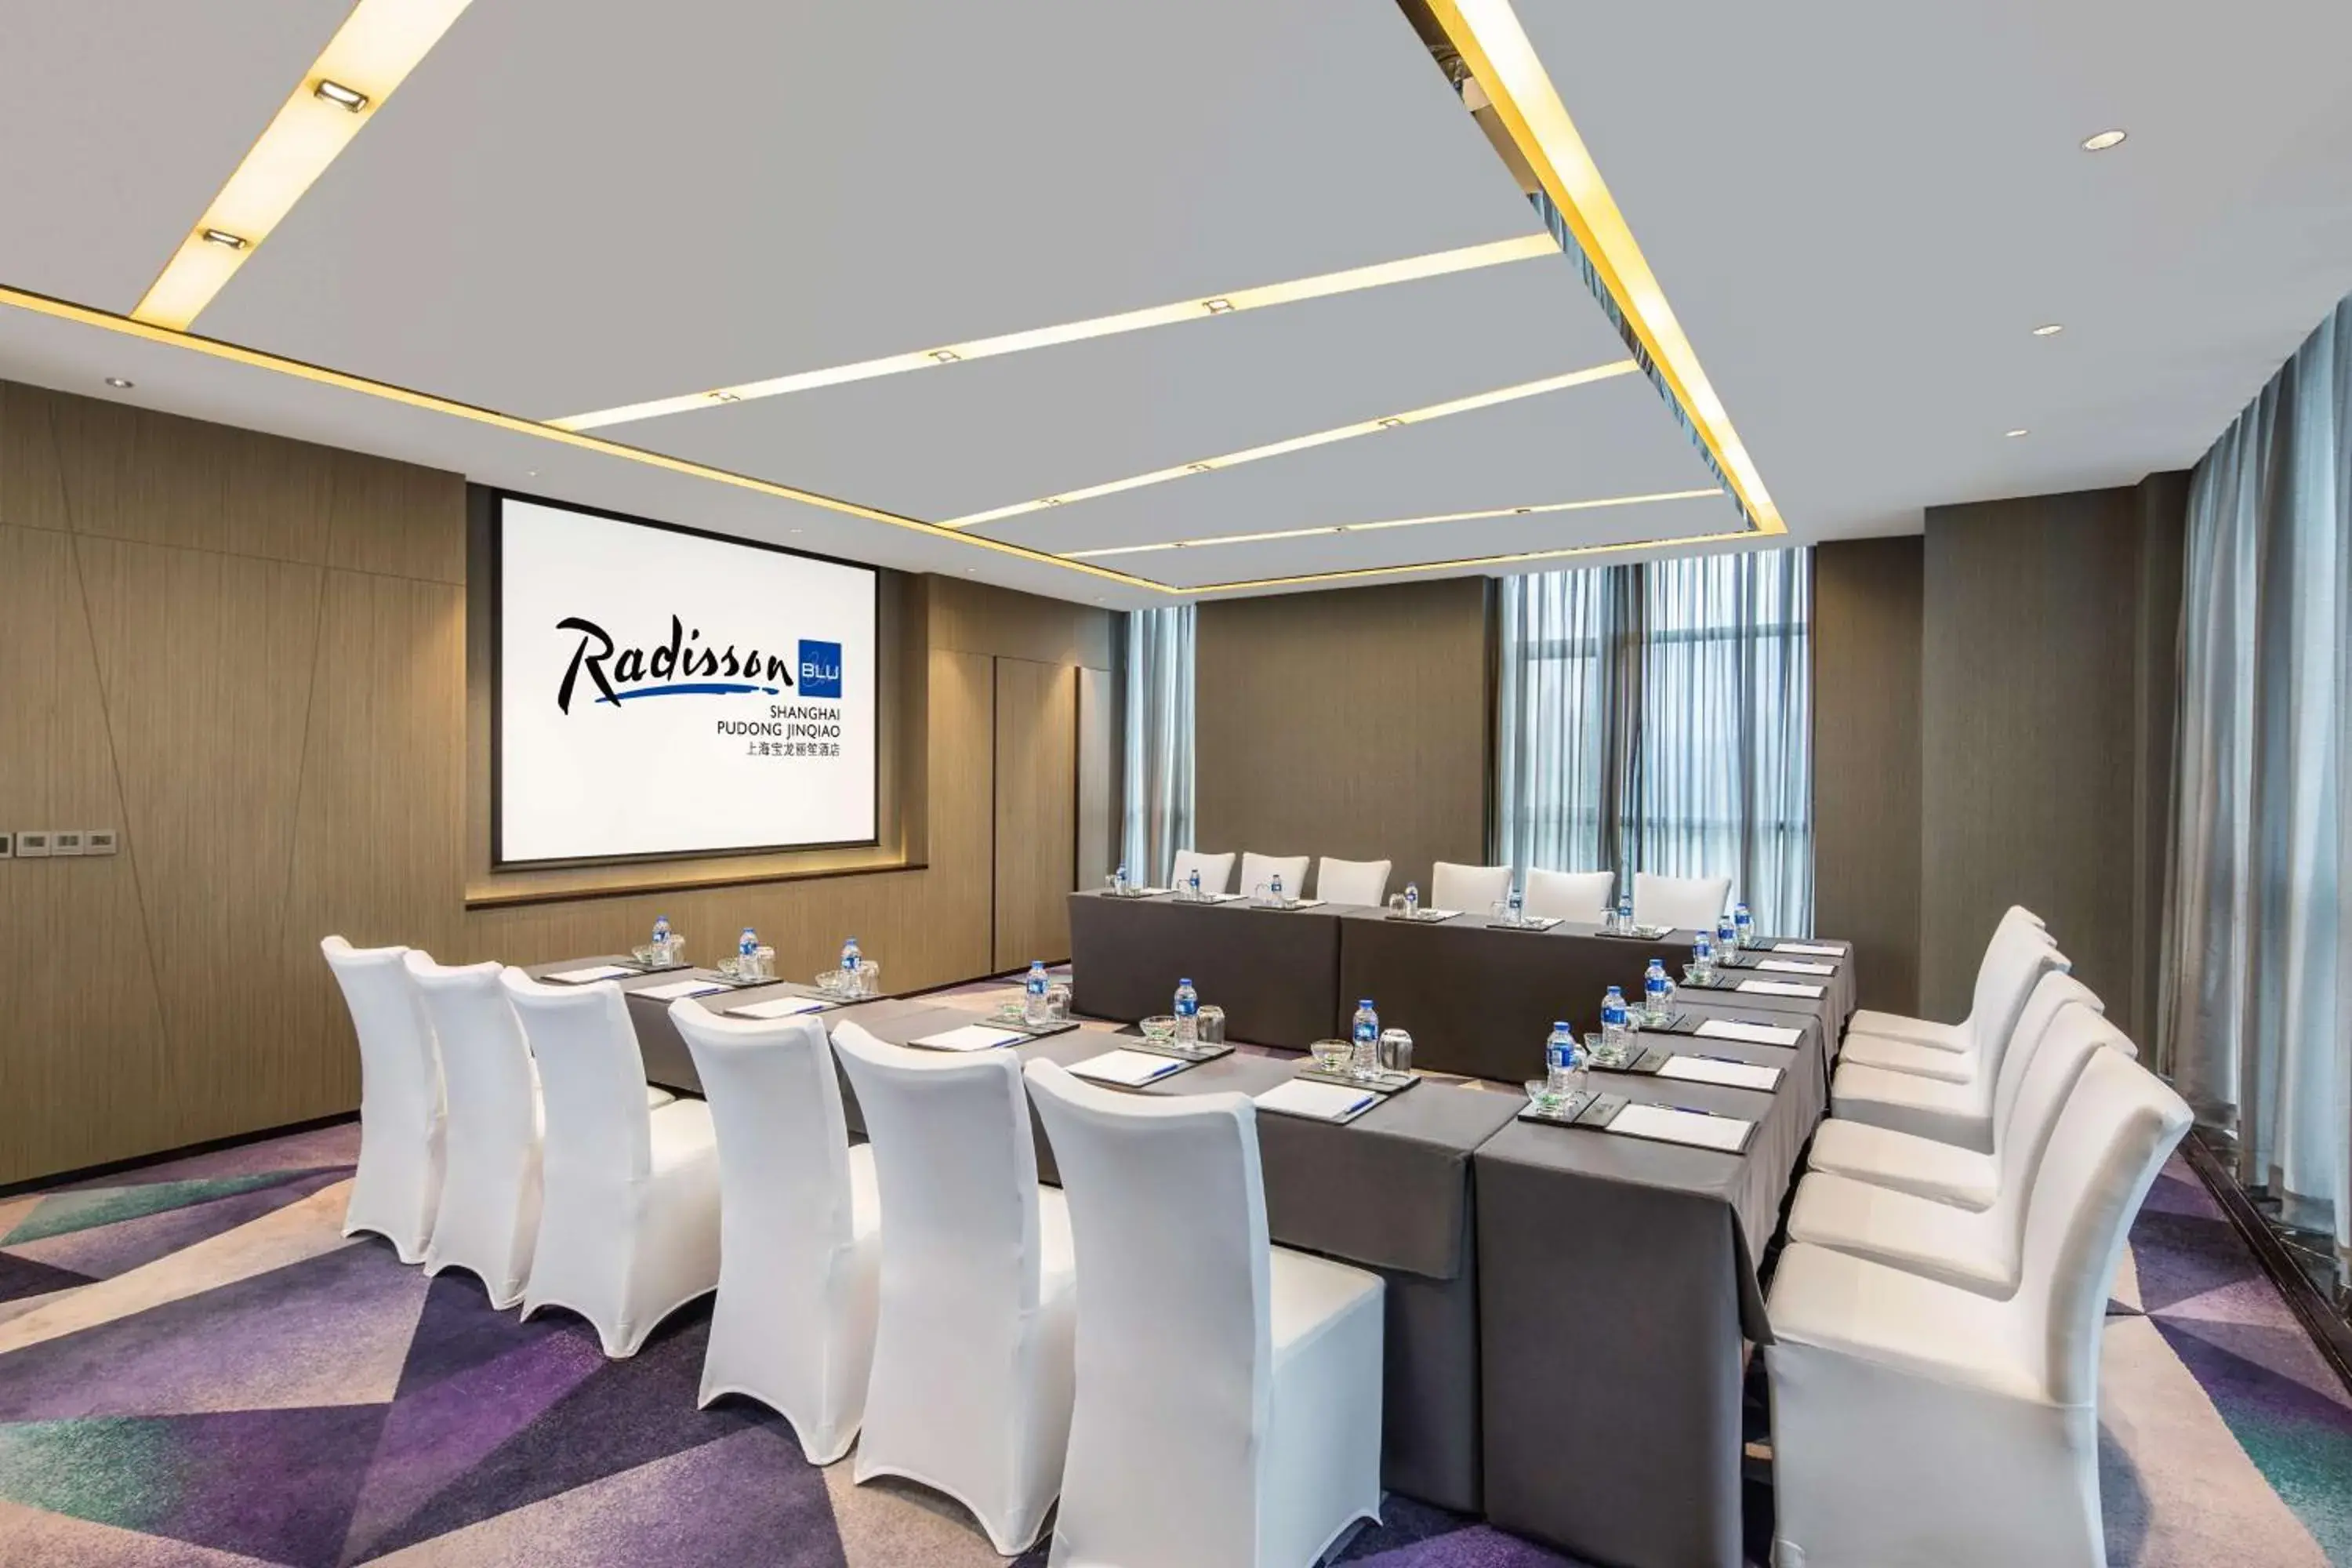 On site in Radisson Blu Shanghai Pudong Jinqiao